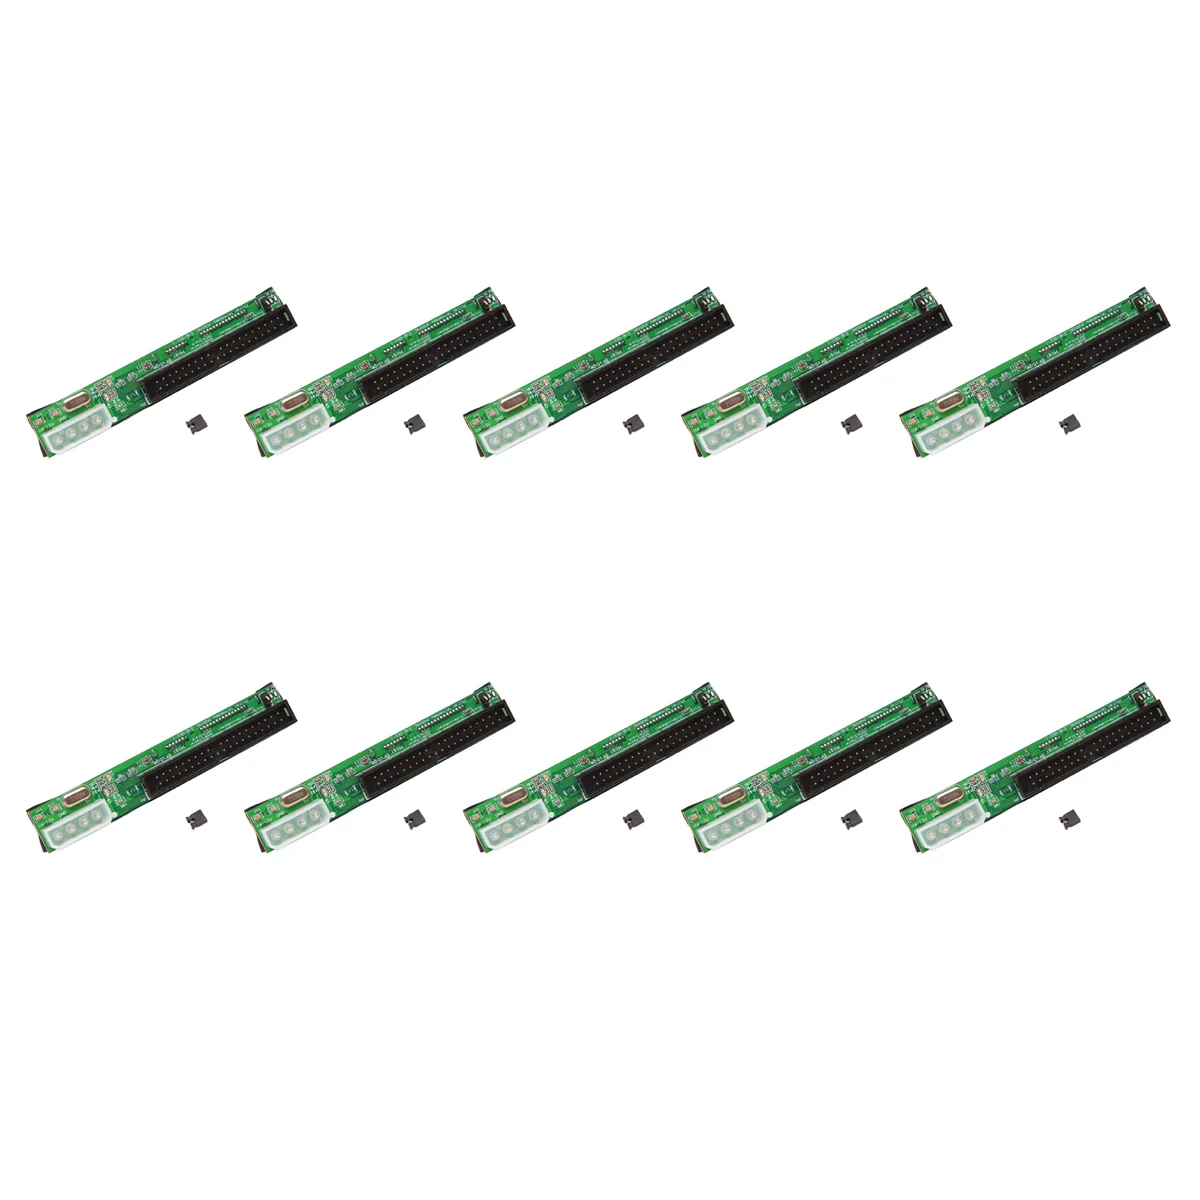 

10X 7+15Pin 2.5 SATA Female to 3.5 Inch Ide SATA to Ide Adapter Converter Male 40 Pin Port for Ata 133 HDD Cd Dvd Serial